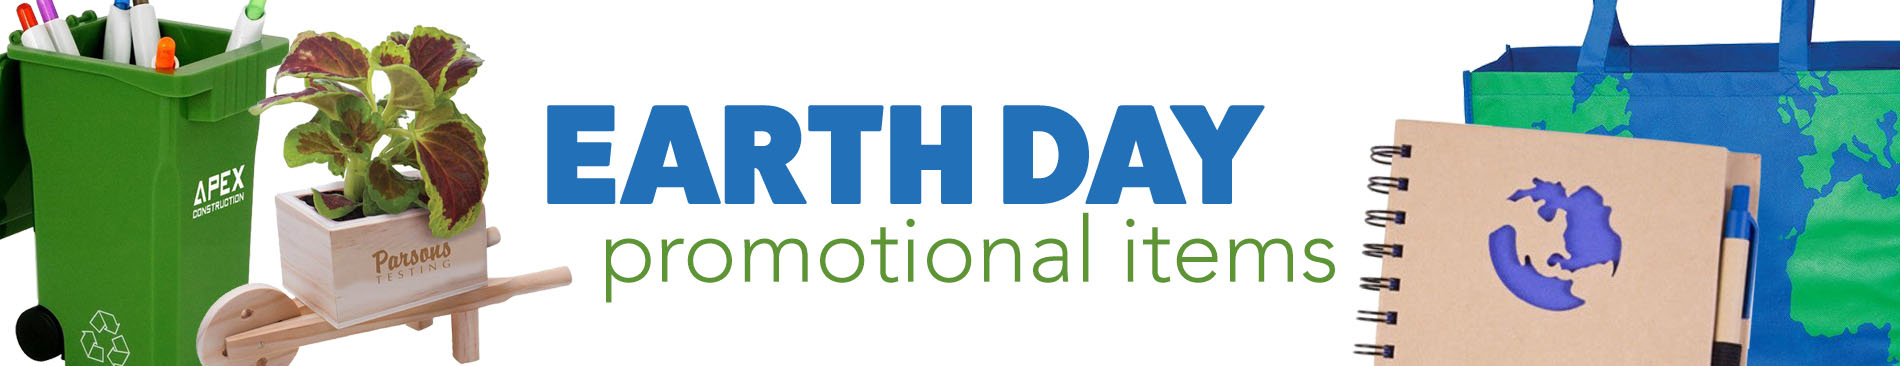 earth day 2021 giveaways